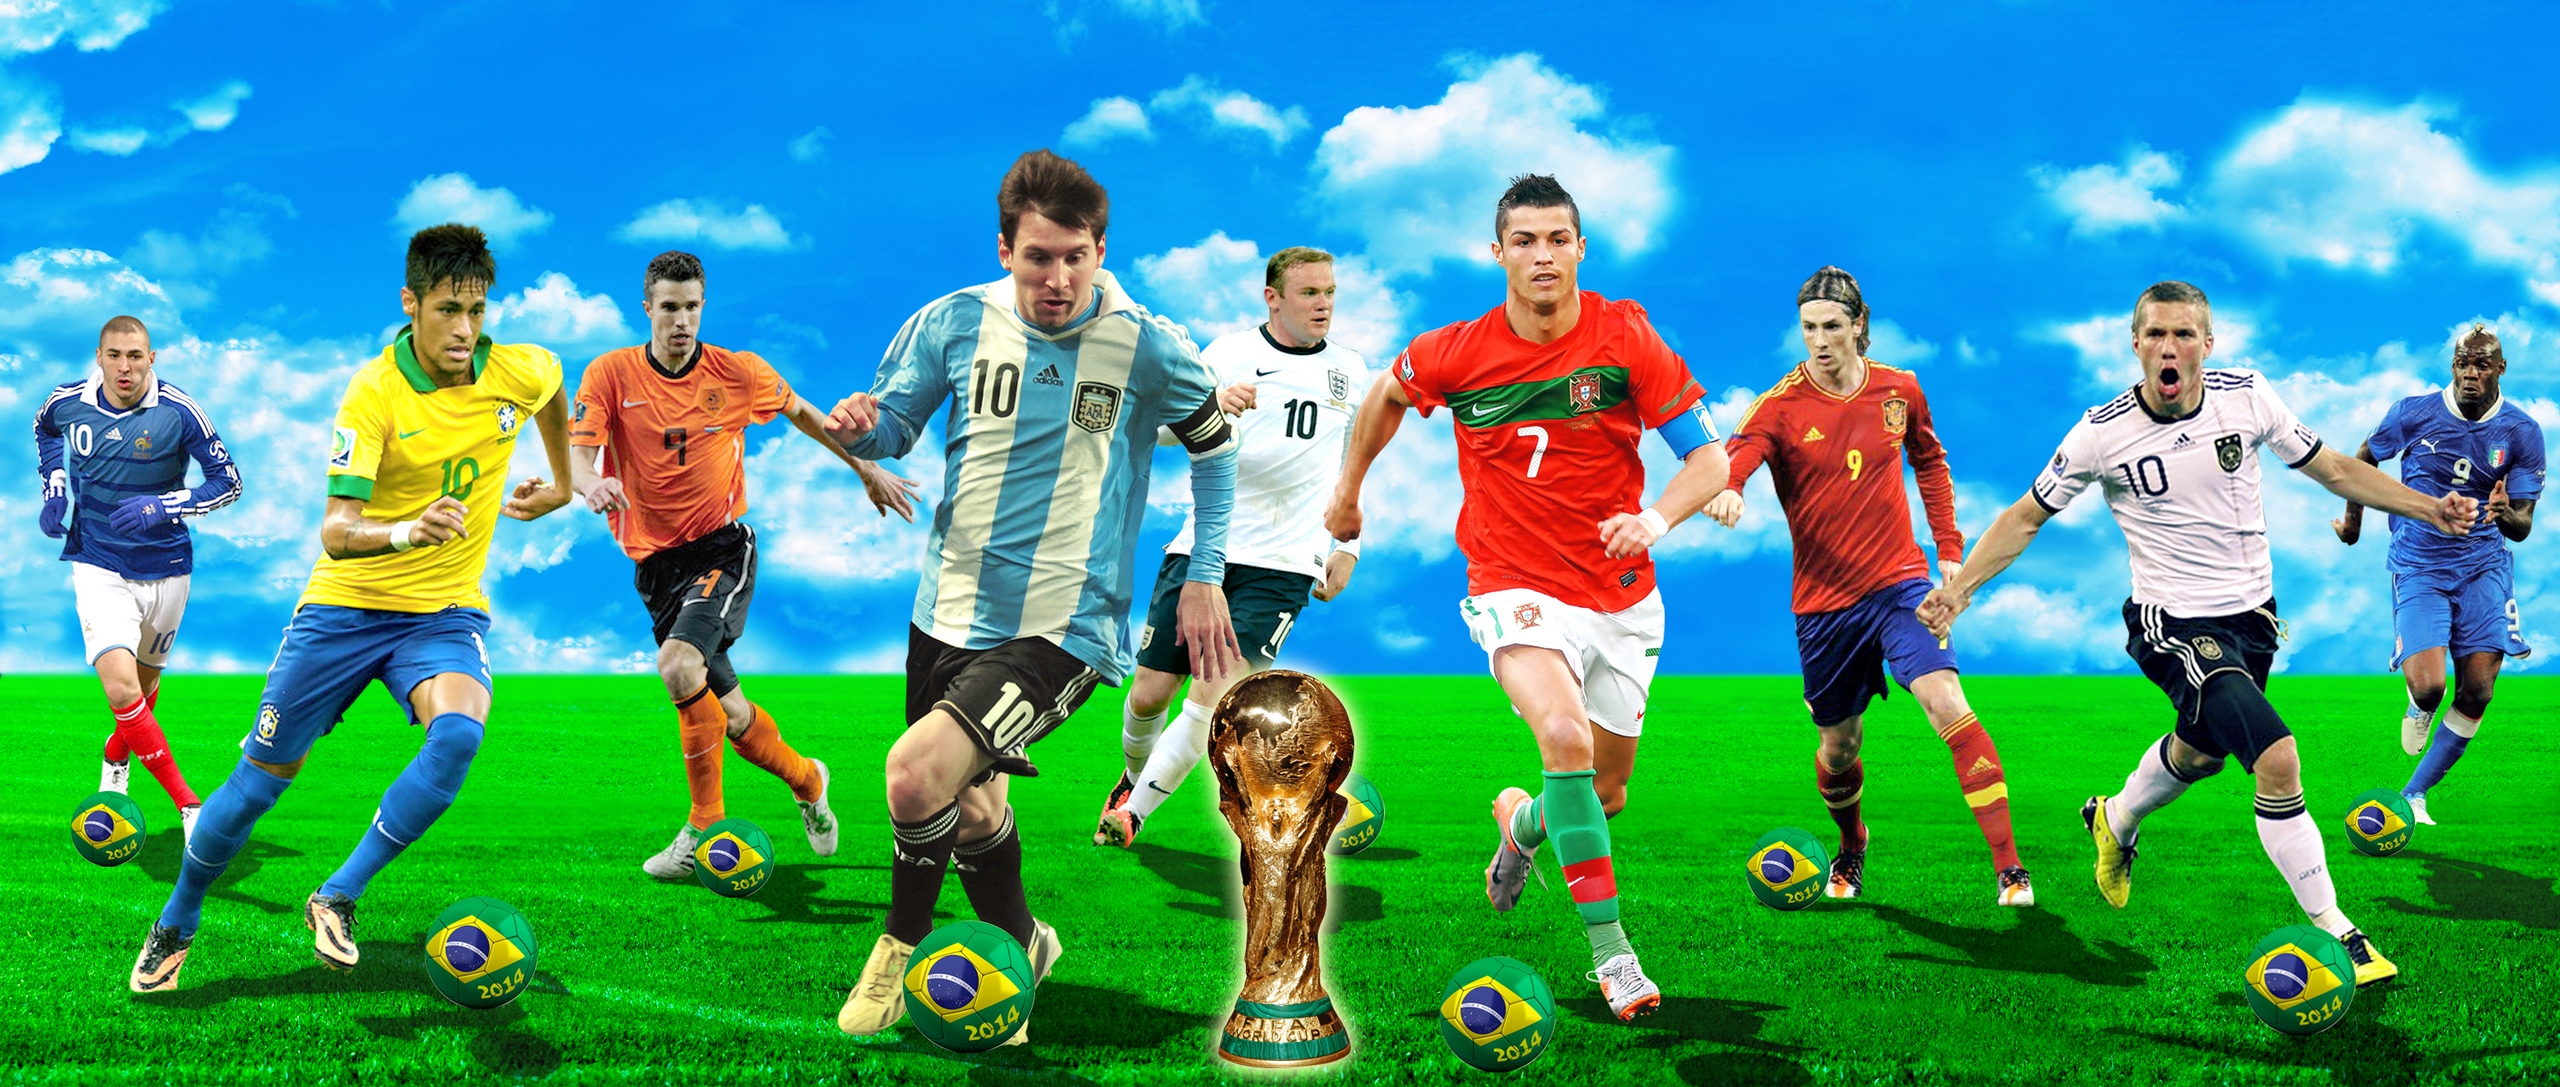 World-Cup-2014-20